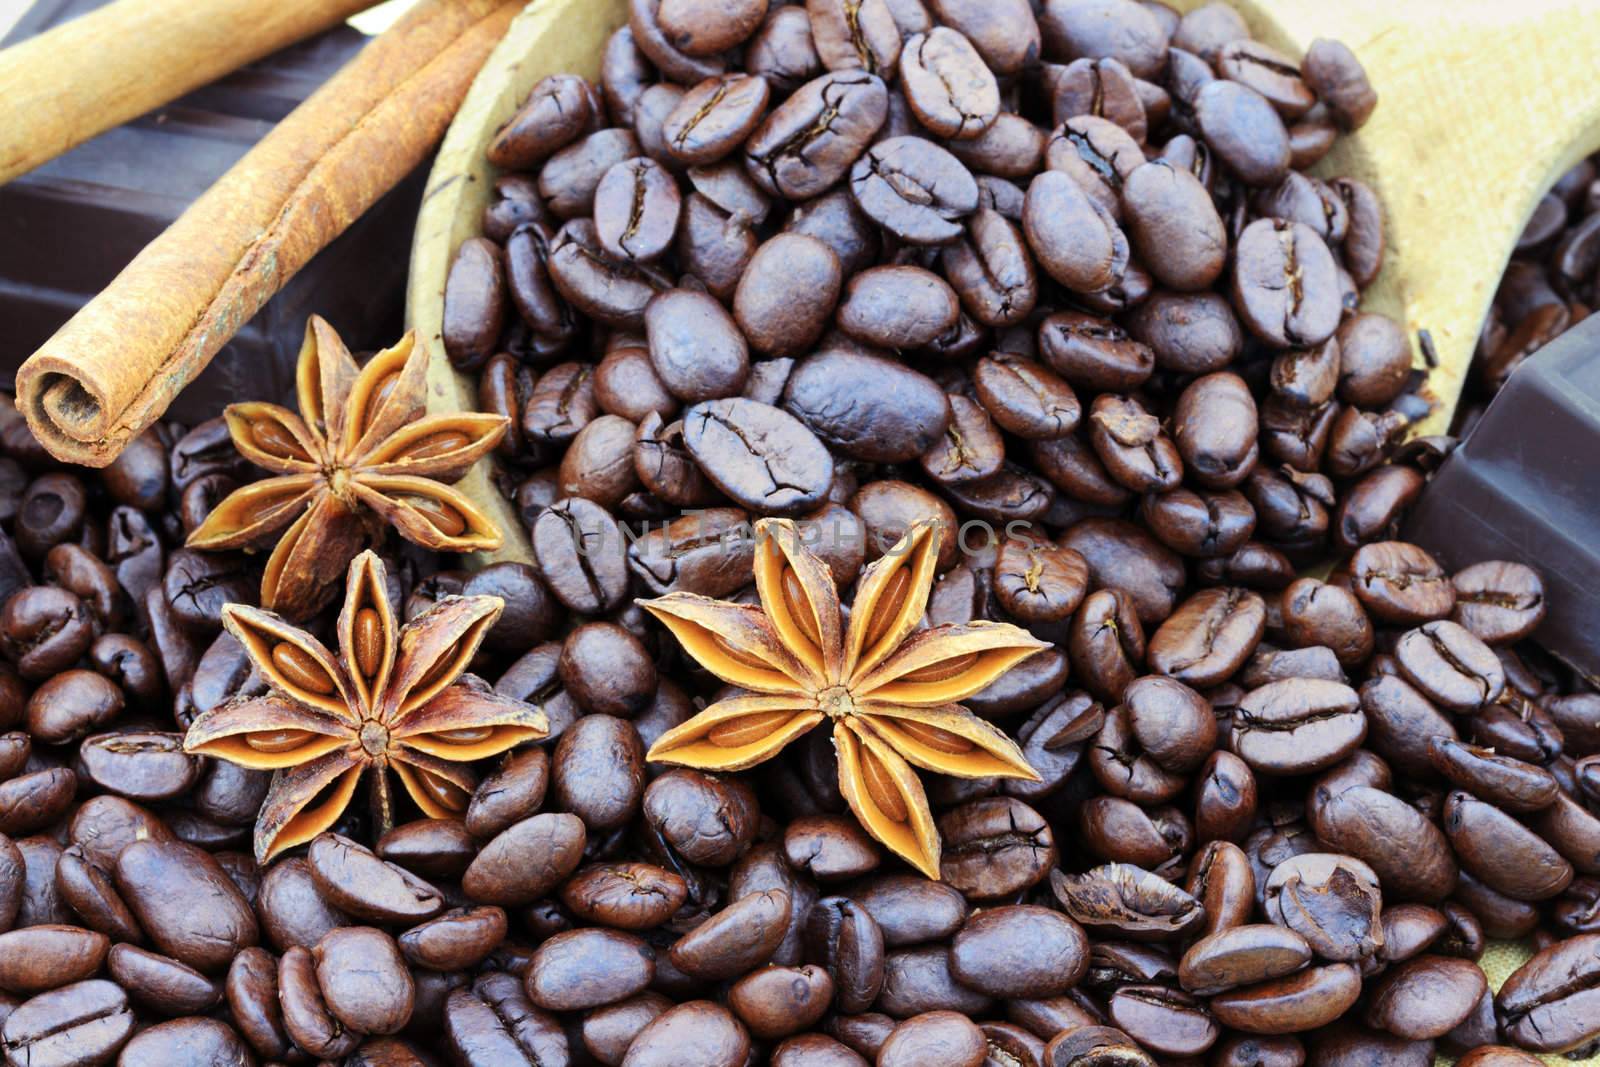 Ingredients of coffee beans, chocolate, cinnamon and anise for gourmet coffee.